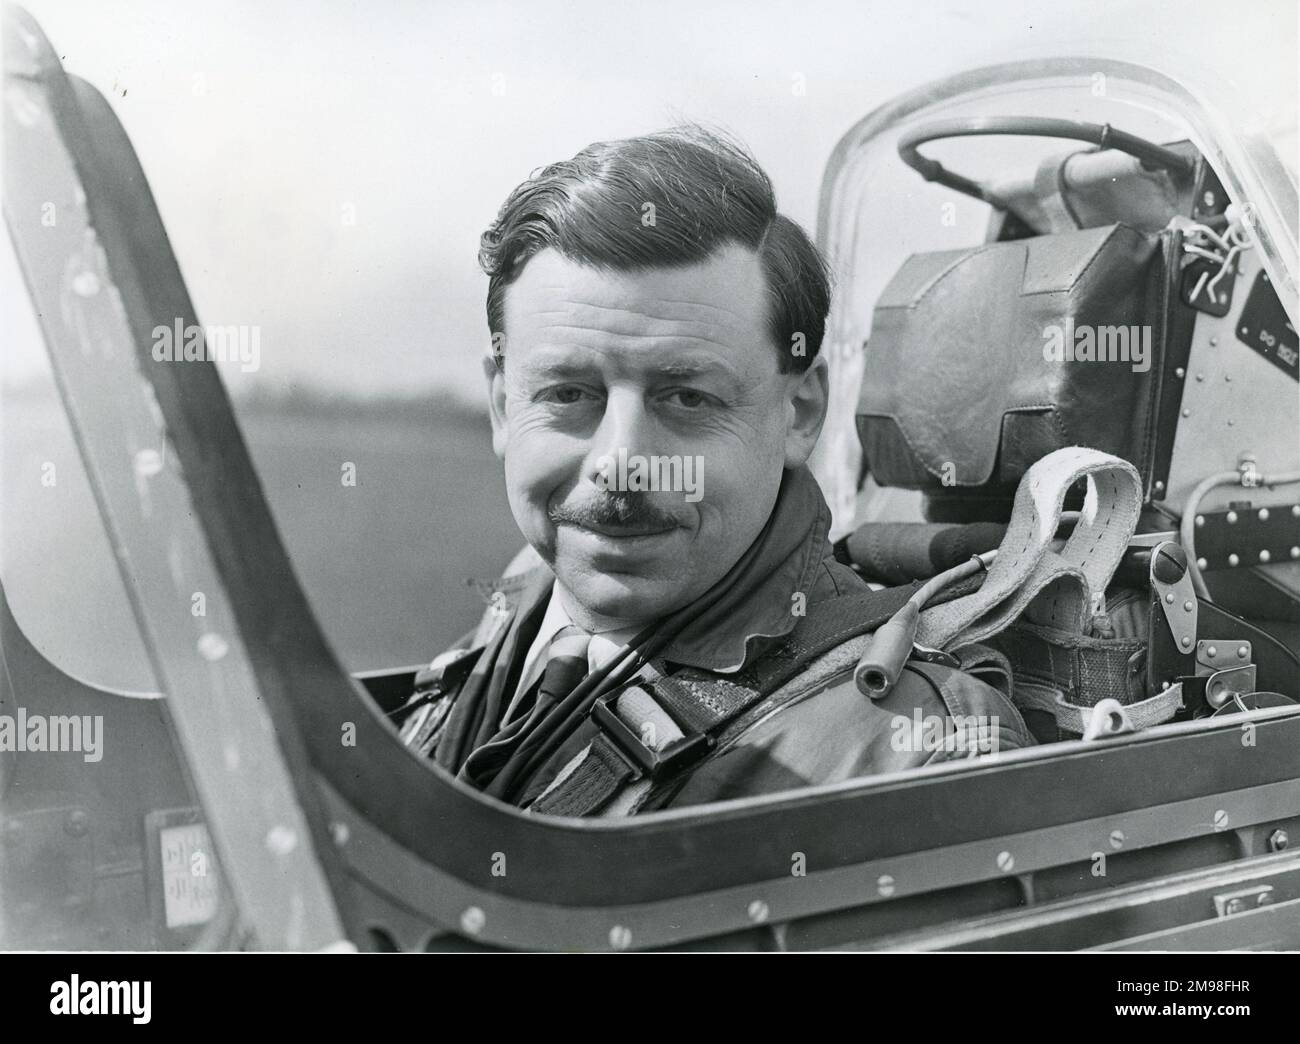 Wg Cdr ?Dickie? Martin, Chief Test Pilot, Gloster. Stock Photo